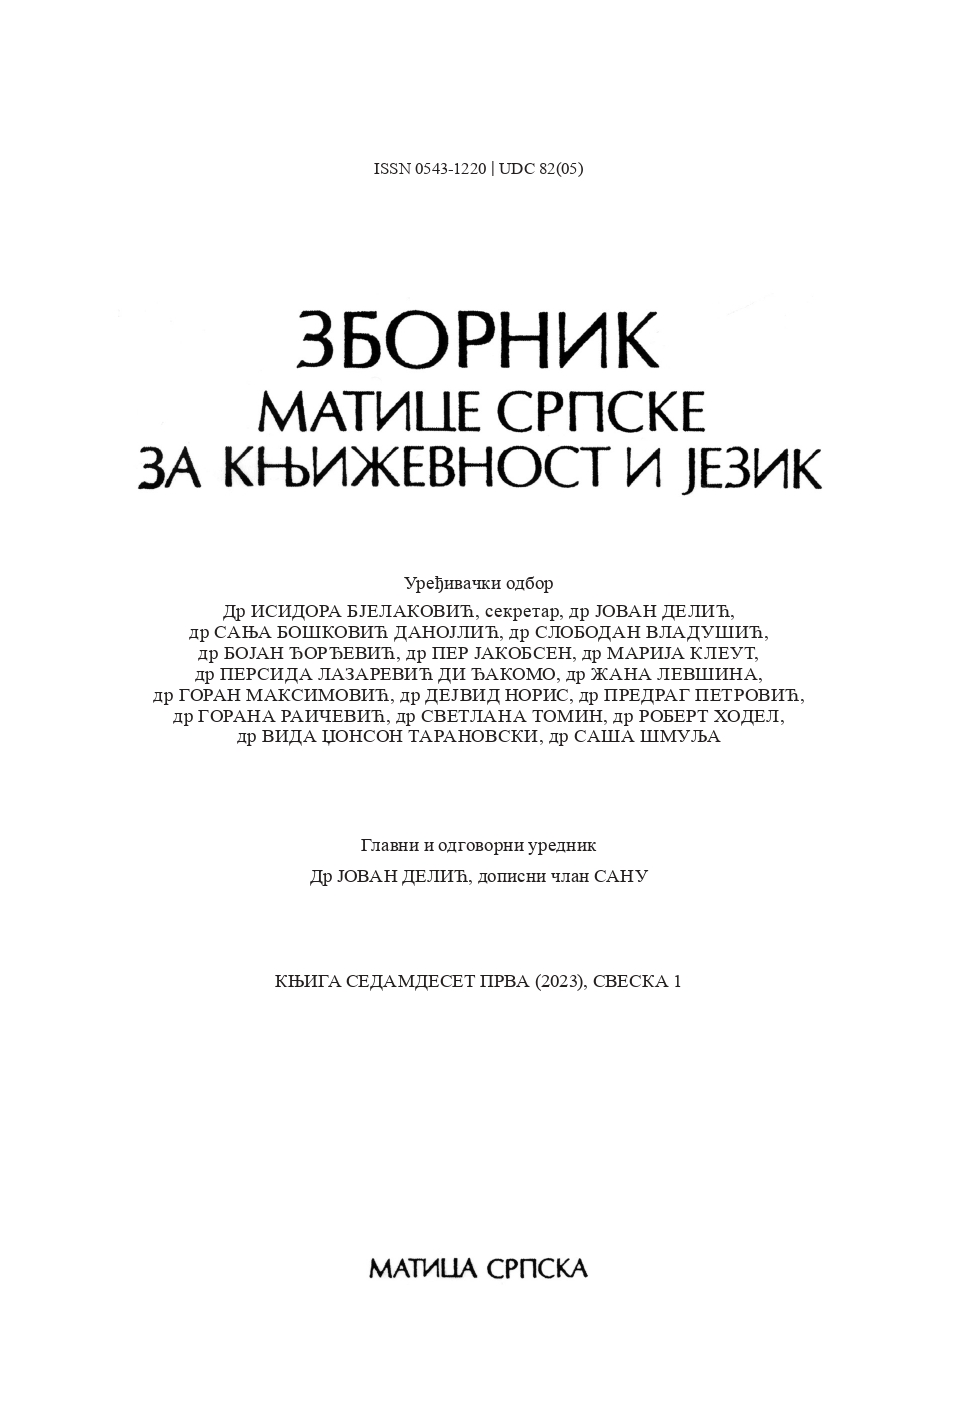 DEFINING OF BIONYMS IN DICTIONARIES OF SERBIAN LANGUAGE Cover Image